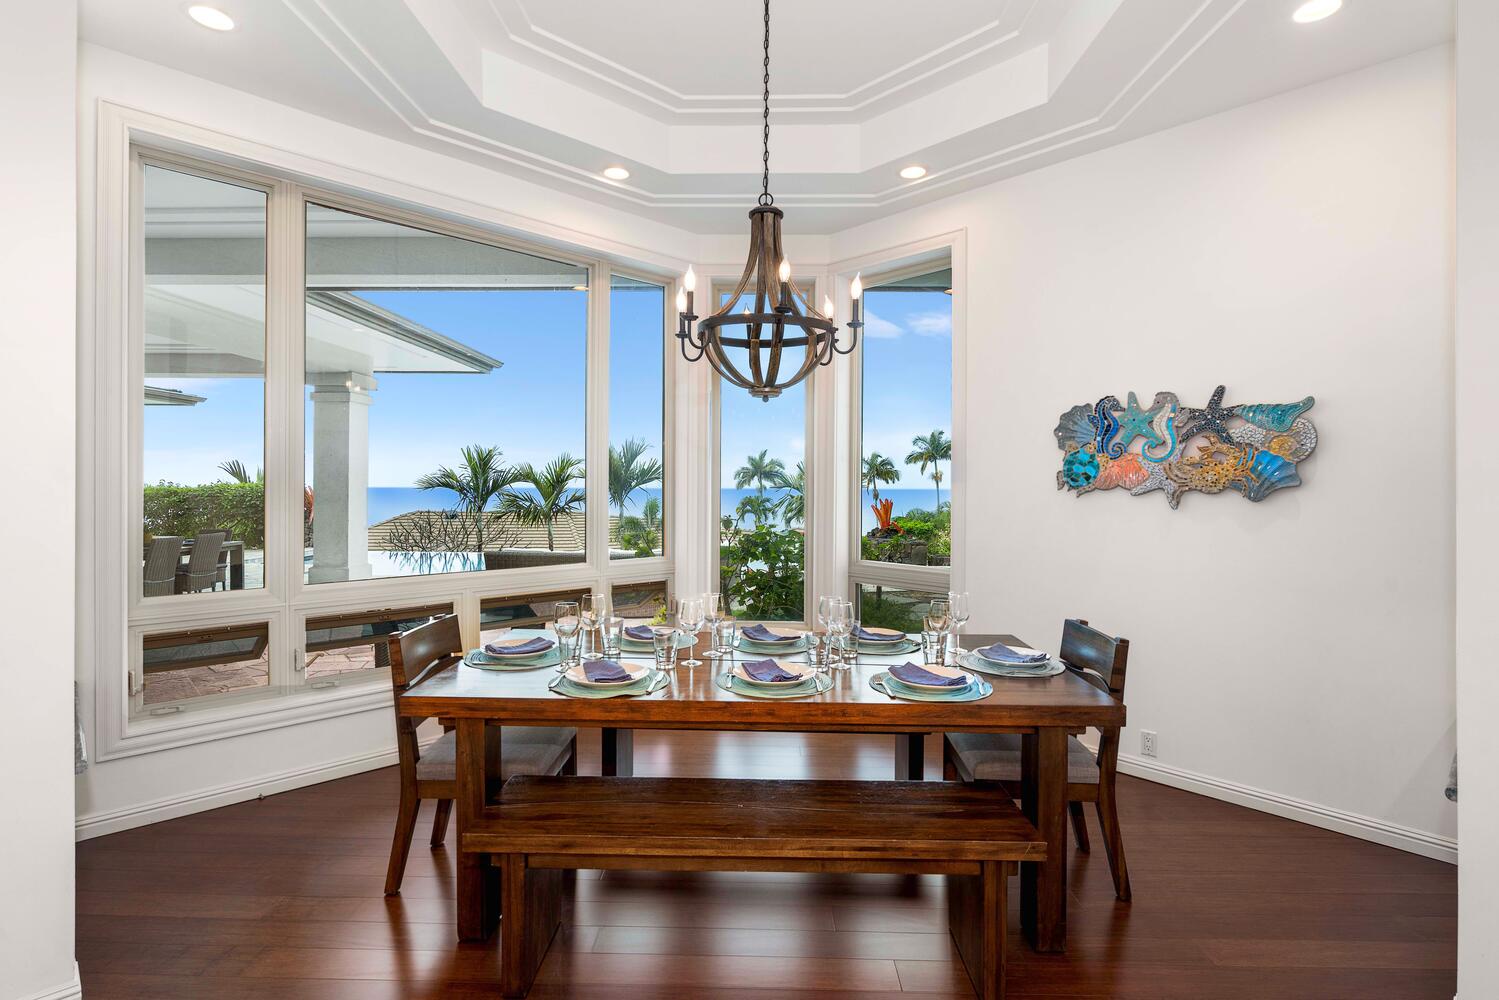 Kailua Kona Vacation Rentals, Blue Hawaii - Indoor dining for 8 with a spectacular ocean view!